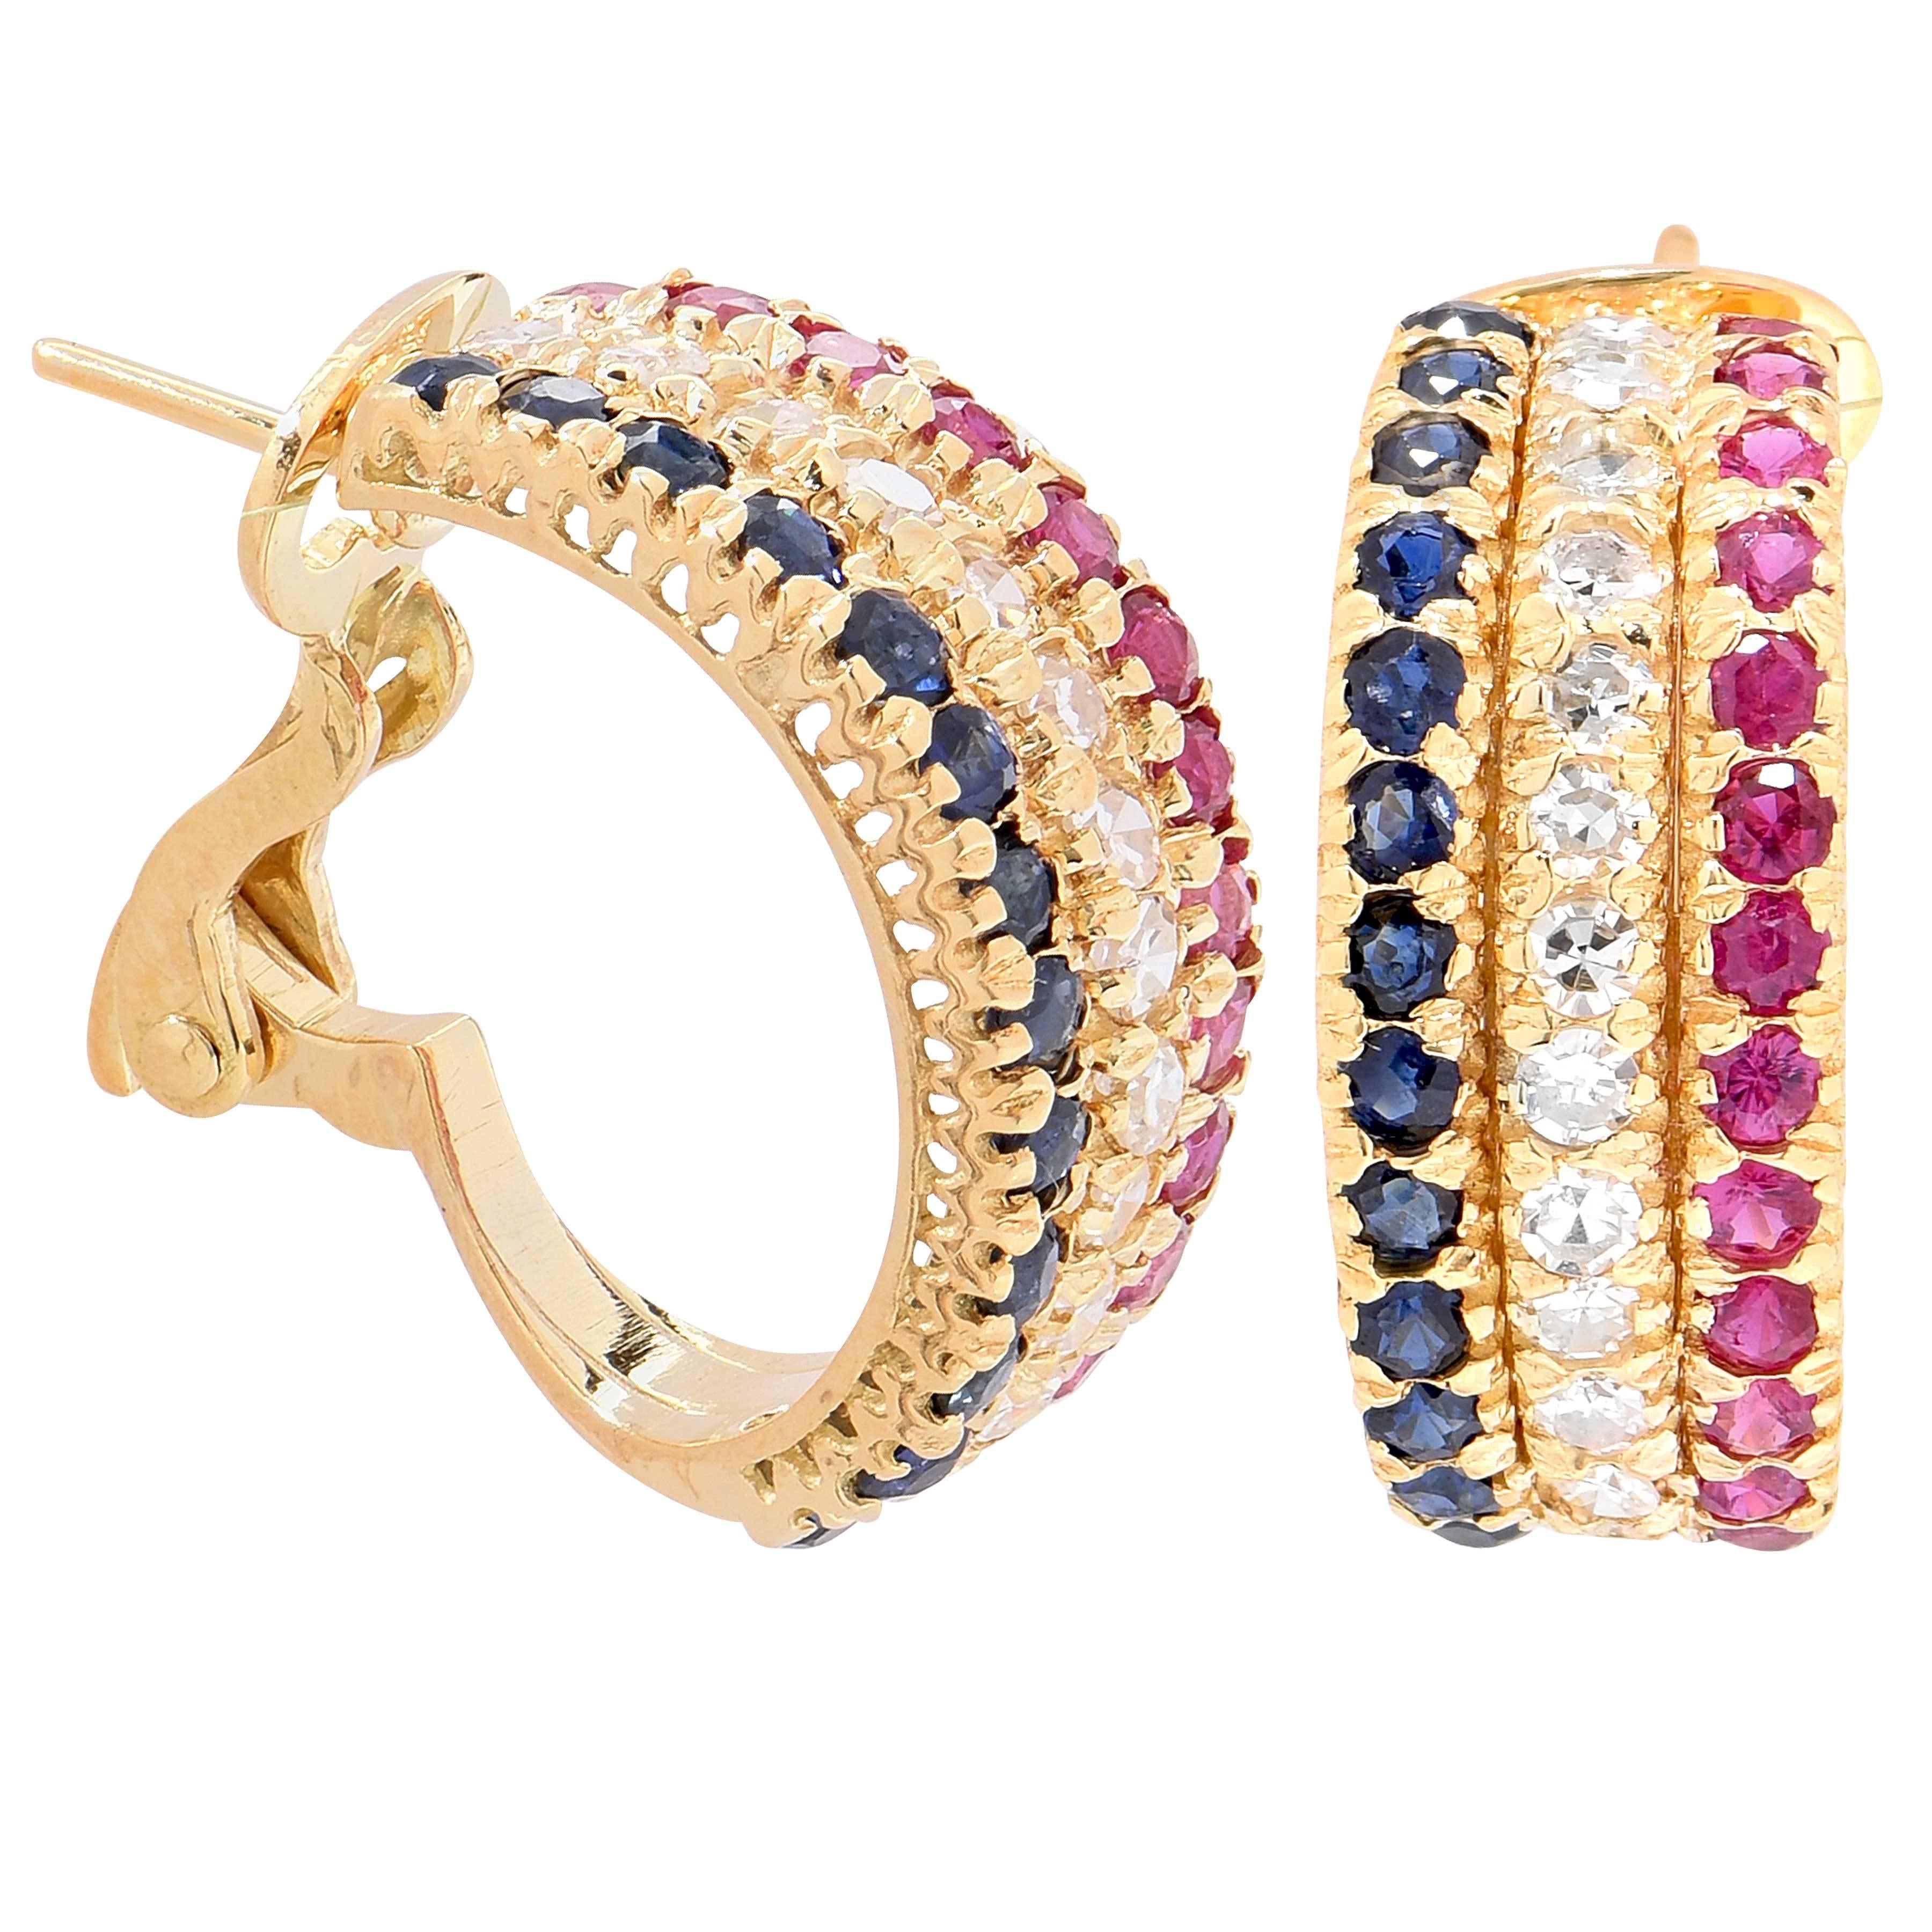 These lively three row earrings feature natural sapphires, rubies and diamonds bead set into 14 karat yellow gold clips with posts.